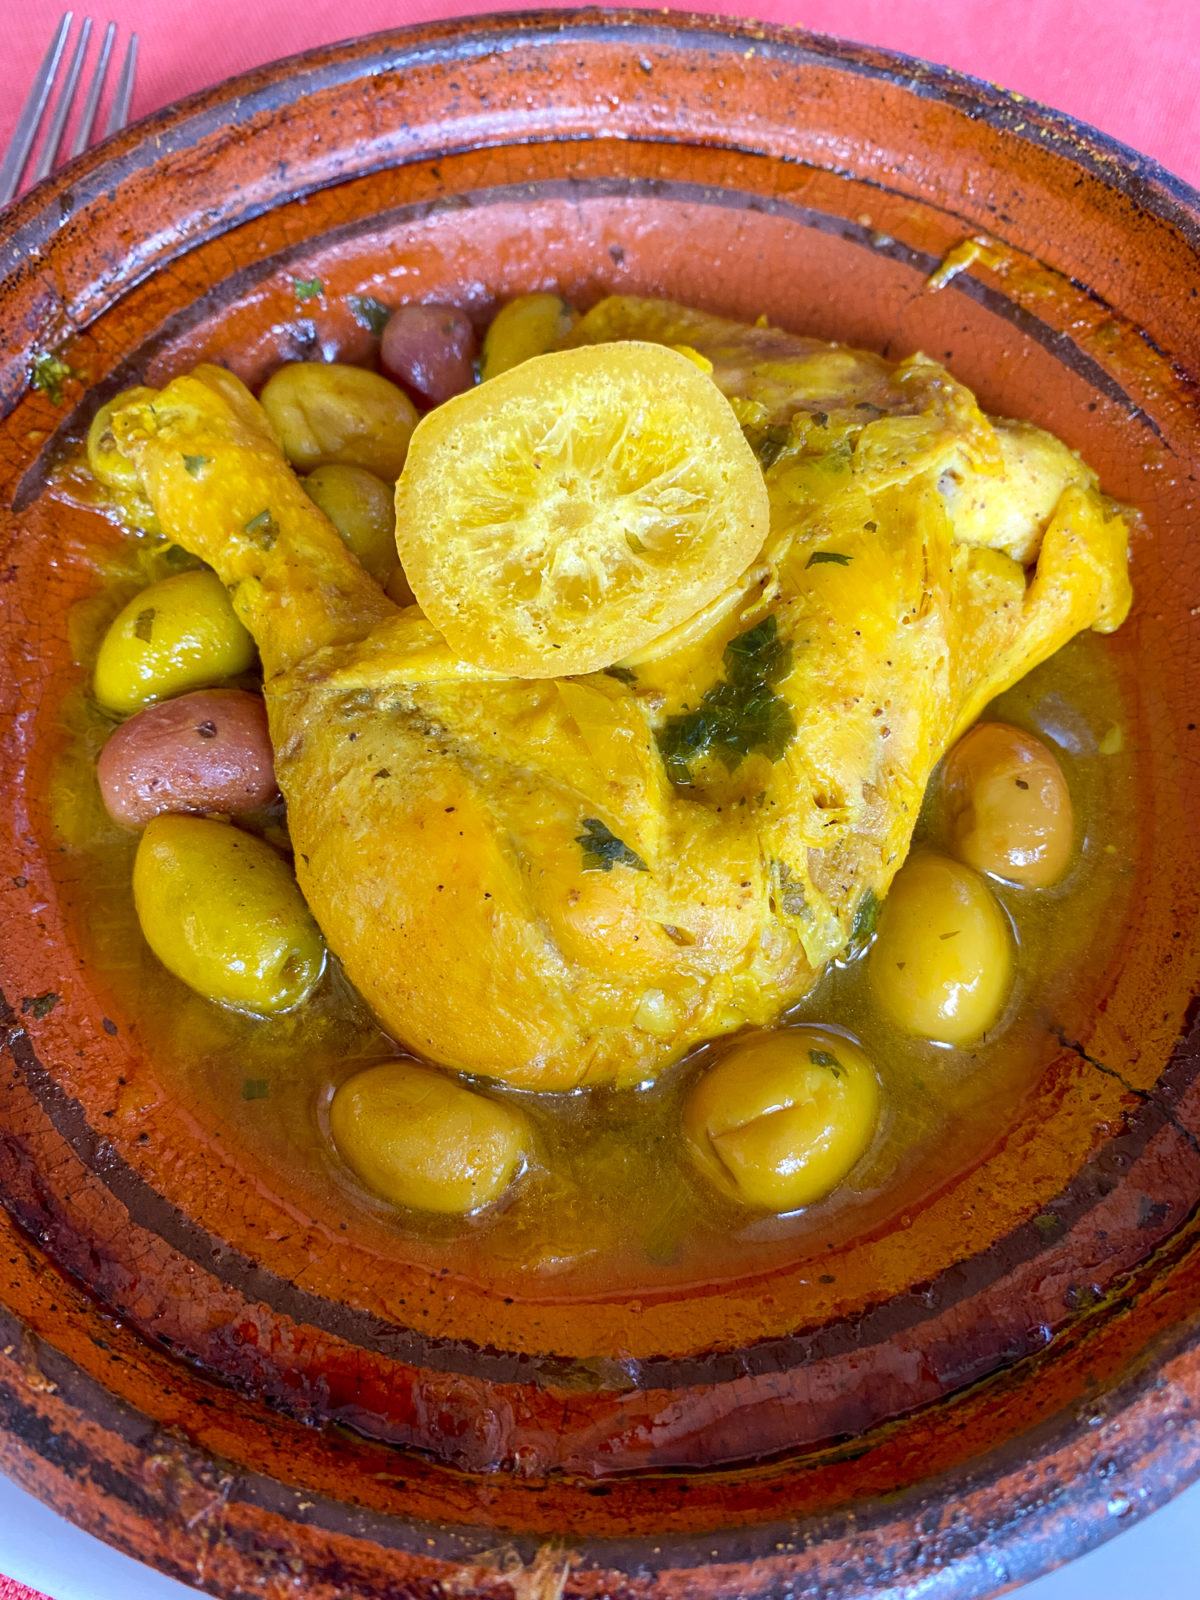 Lemon and olive chicken tagine in Morocco